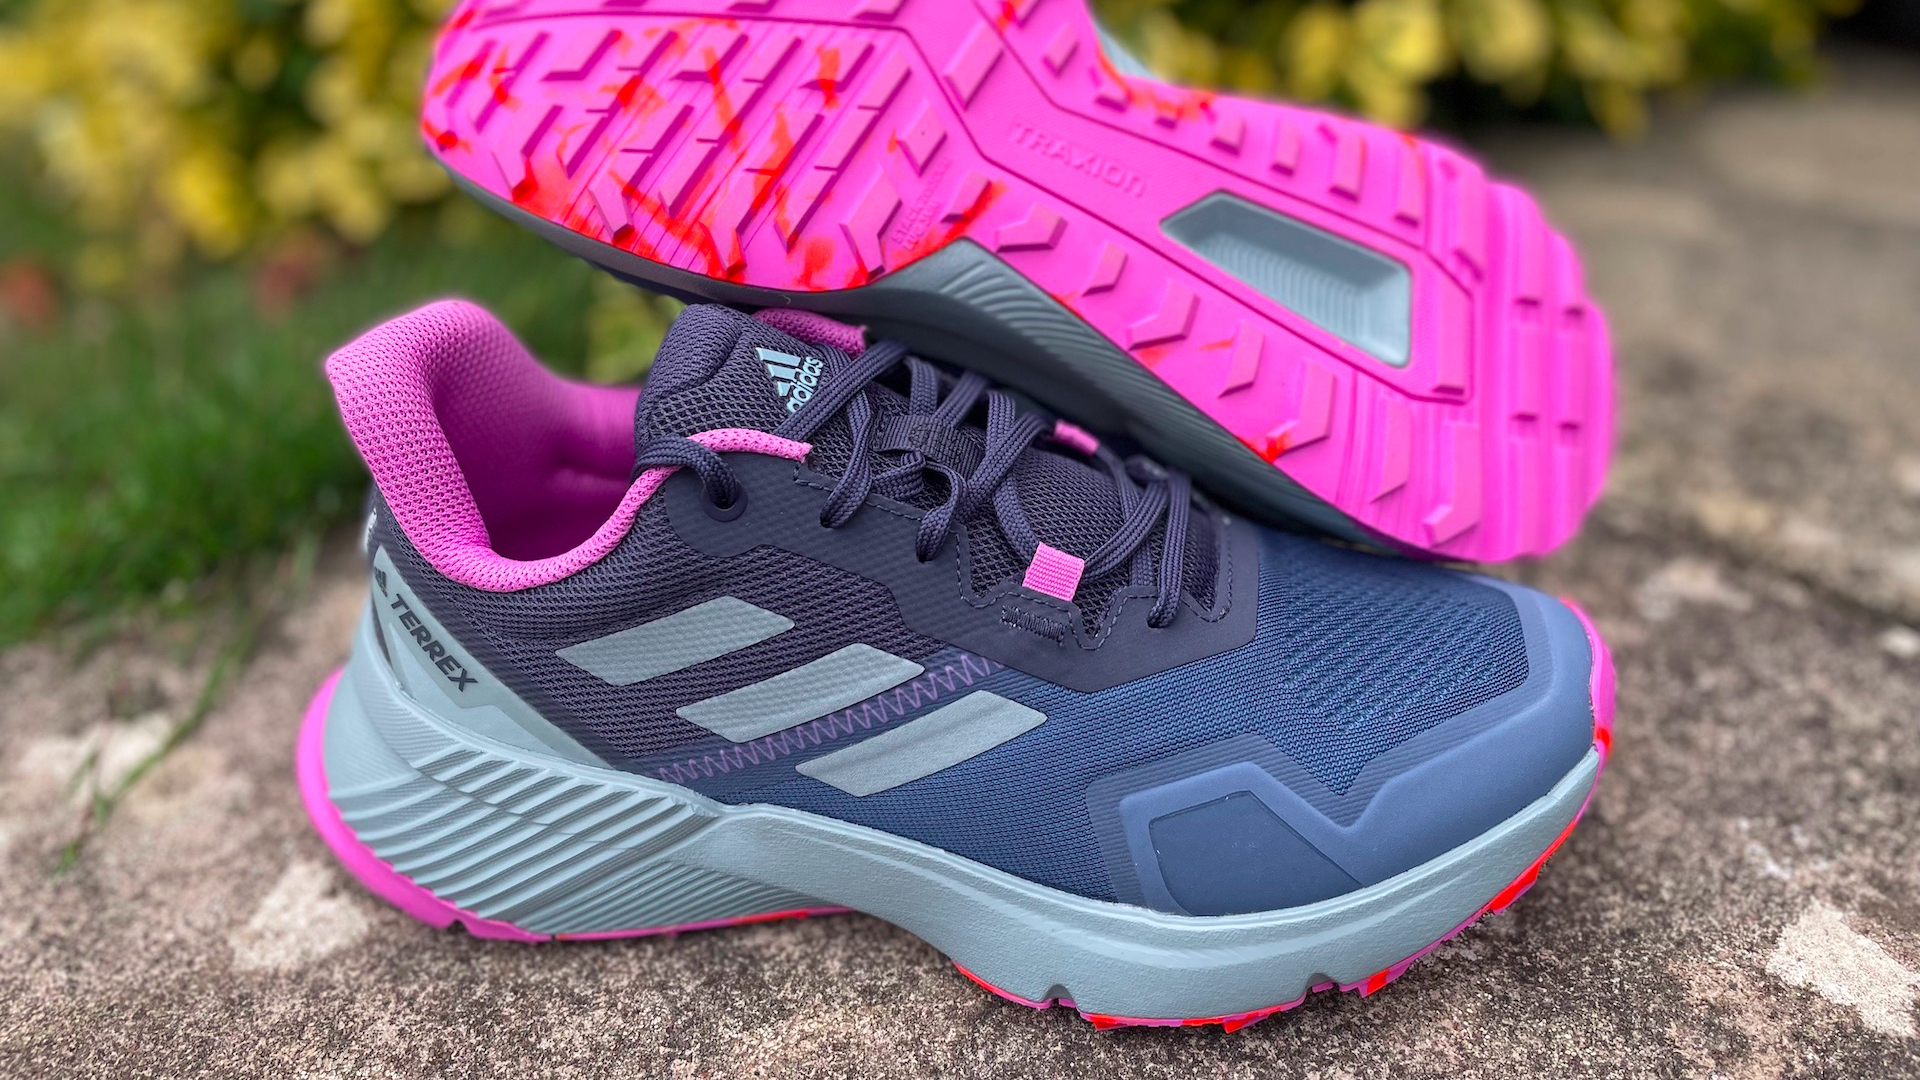 Adidas Soulstride running shoe review |